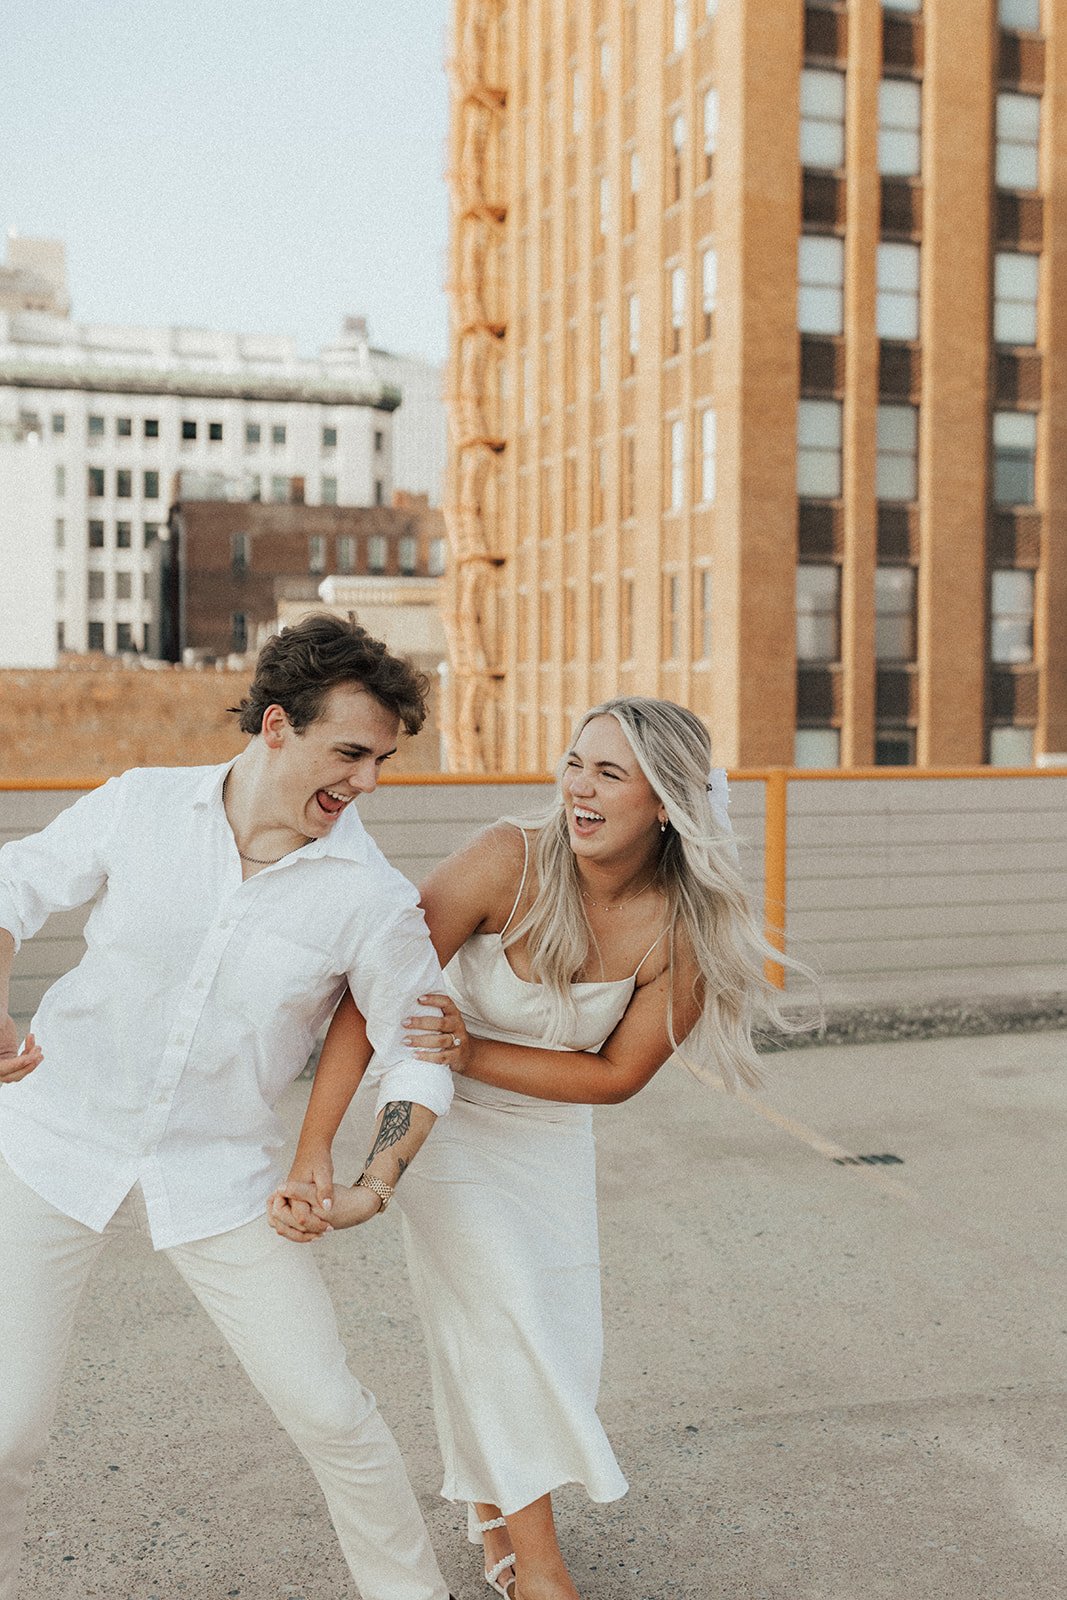 hannah-and-trey-parking-can-be-fun-downtown-memphis-river-walk-mississippi-beach-tennessee-wedding-photographer-jo-darling-photography-102.jpg